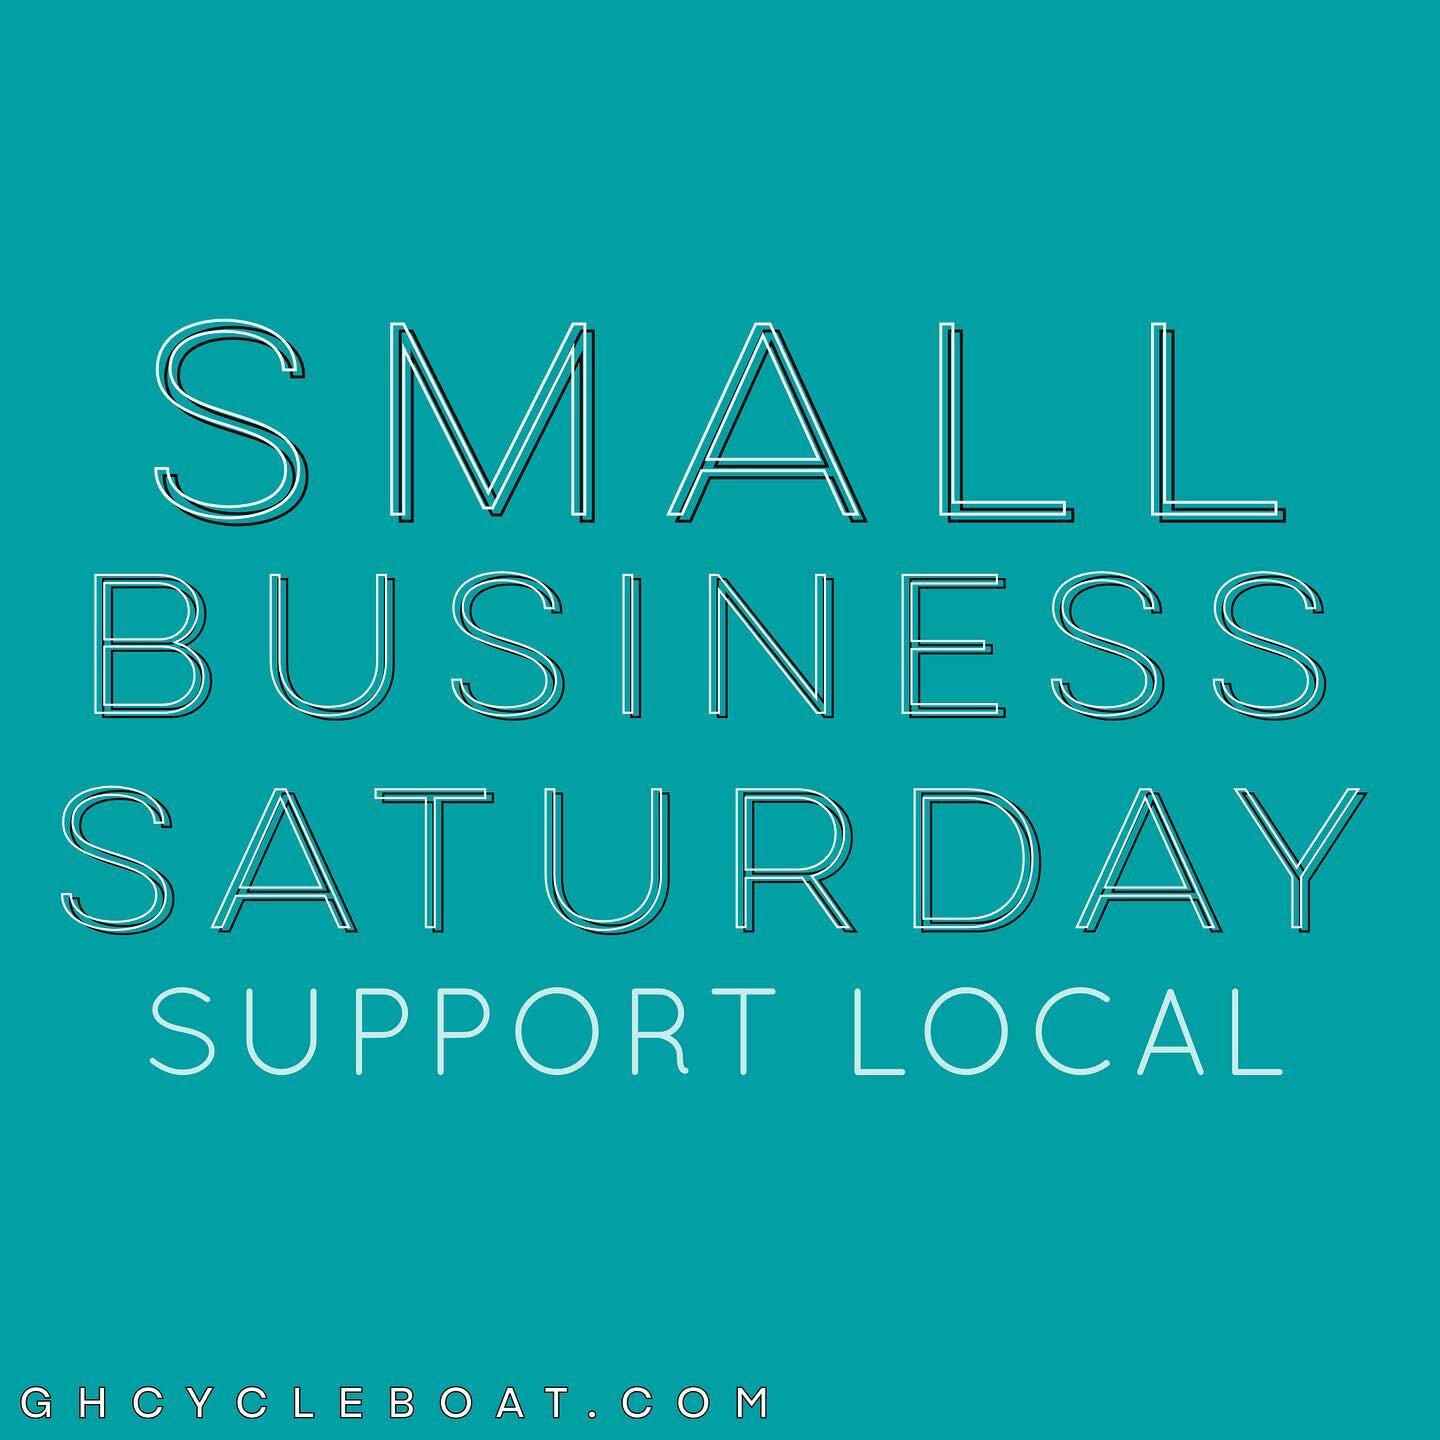 Take part in Small Business Saturday with us this year with $50 OFF any scheduled trip or gift certificate purchase AND a free sweatshirt! Promo code: SUPPORTSMALL 

#GHcycleboat